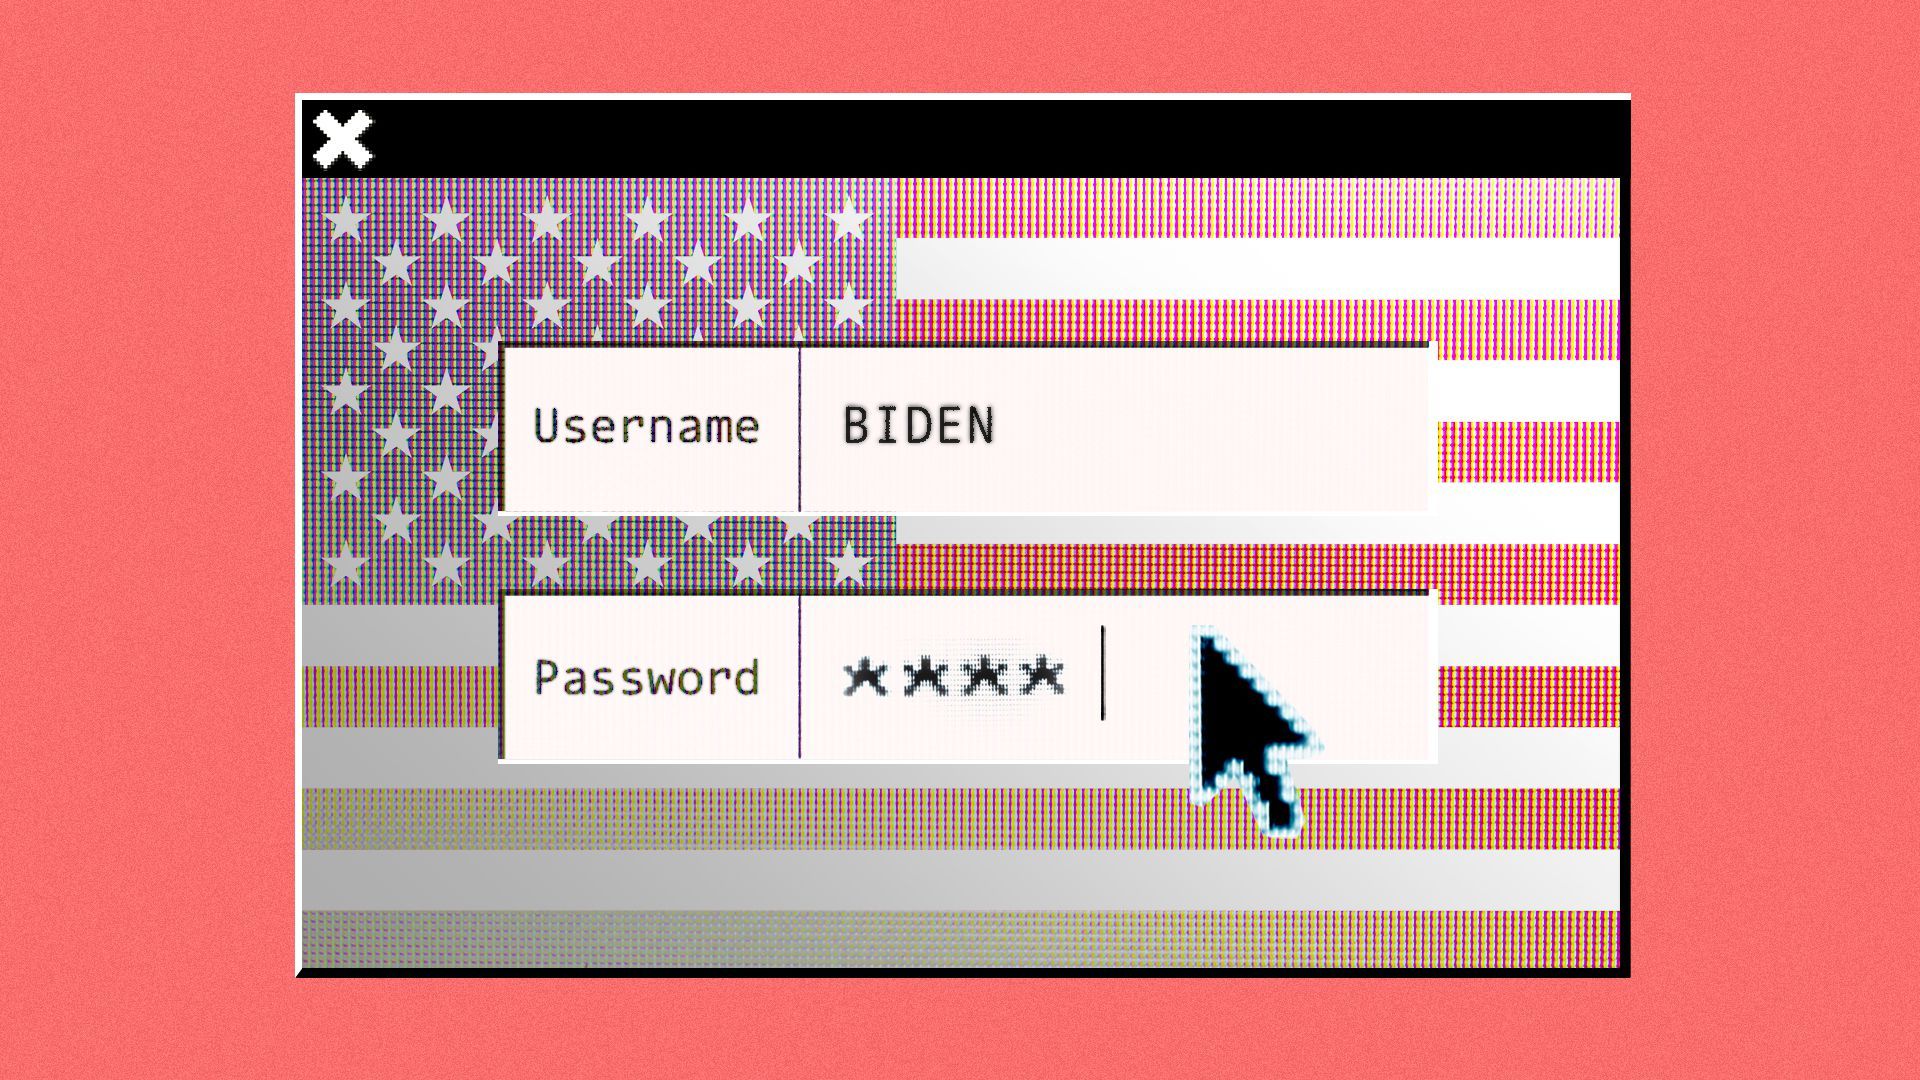 Illustration of a security log-in screen on a computer with Biden's username